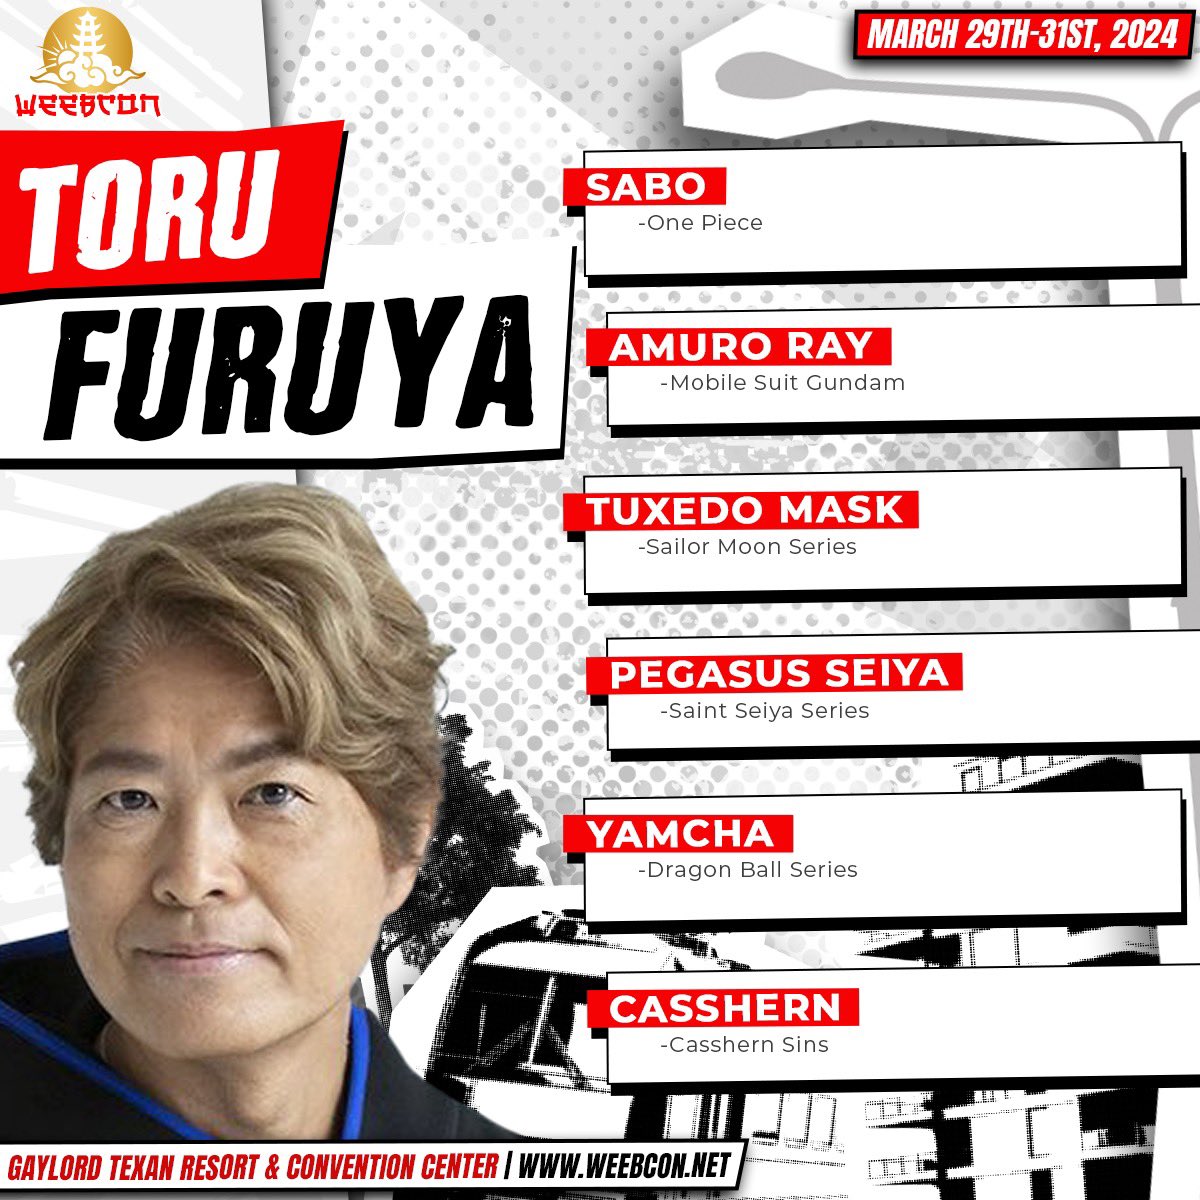 ⛅️JAPANESE CELEBRITY GUEST⛅️ We are honored to have the Legendary Seiyū Toru Furuya join us for WeebCon 2024 ⛅️ The Meet & Greet + Autograph (Funko or Other) will be ticketed on a first come first basis. Visit WeebCon.net->Tickets->Ticket Signings to reserve your spot!